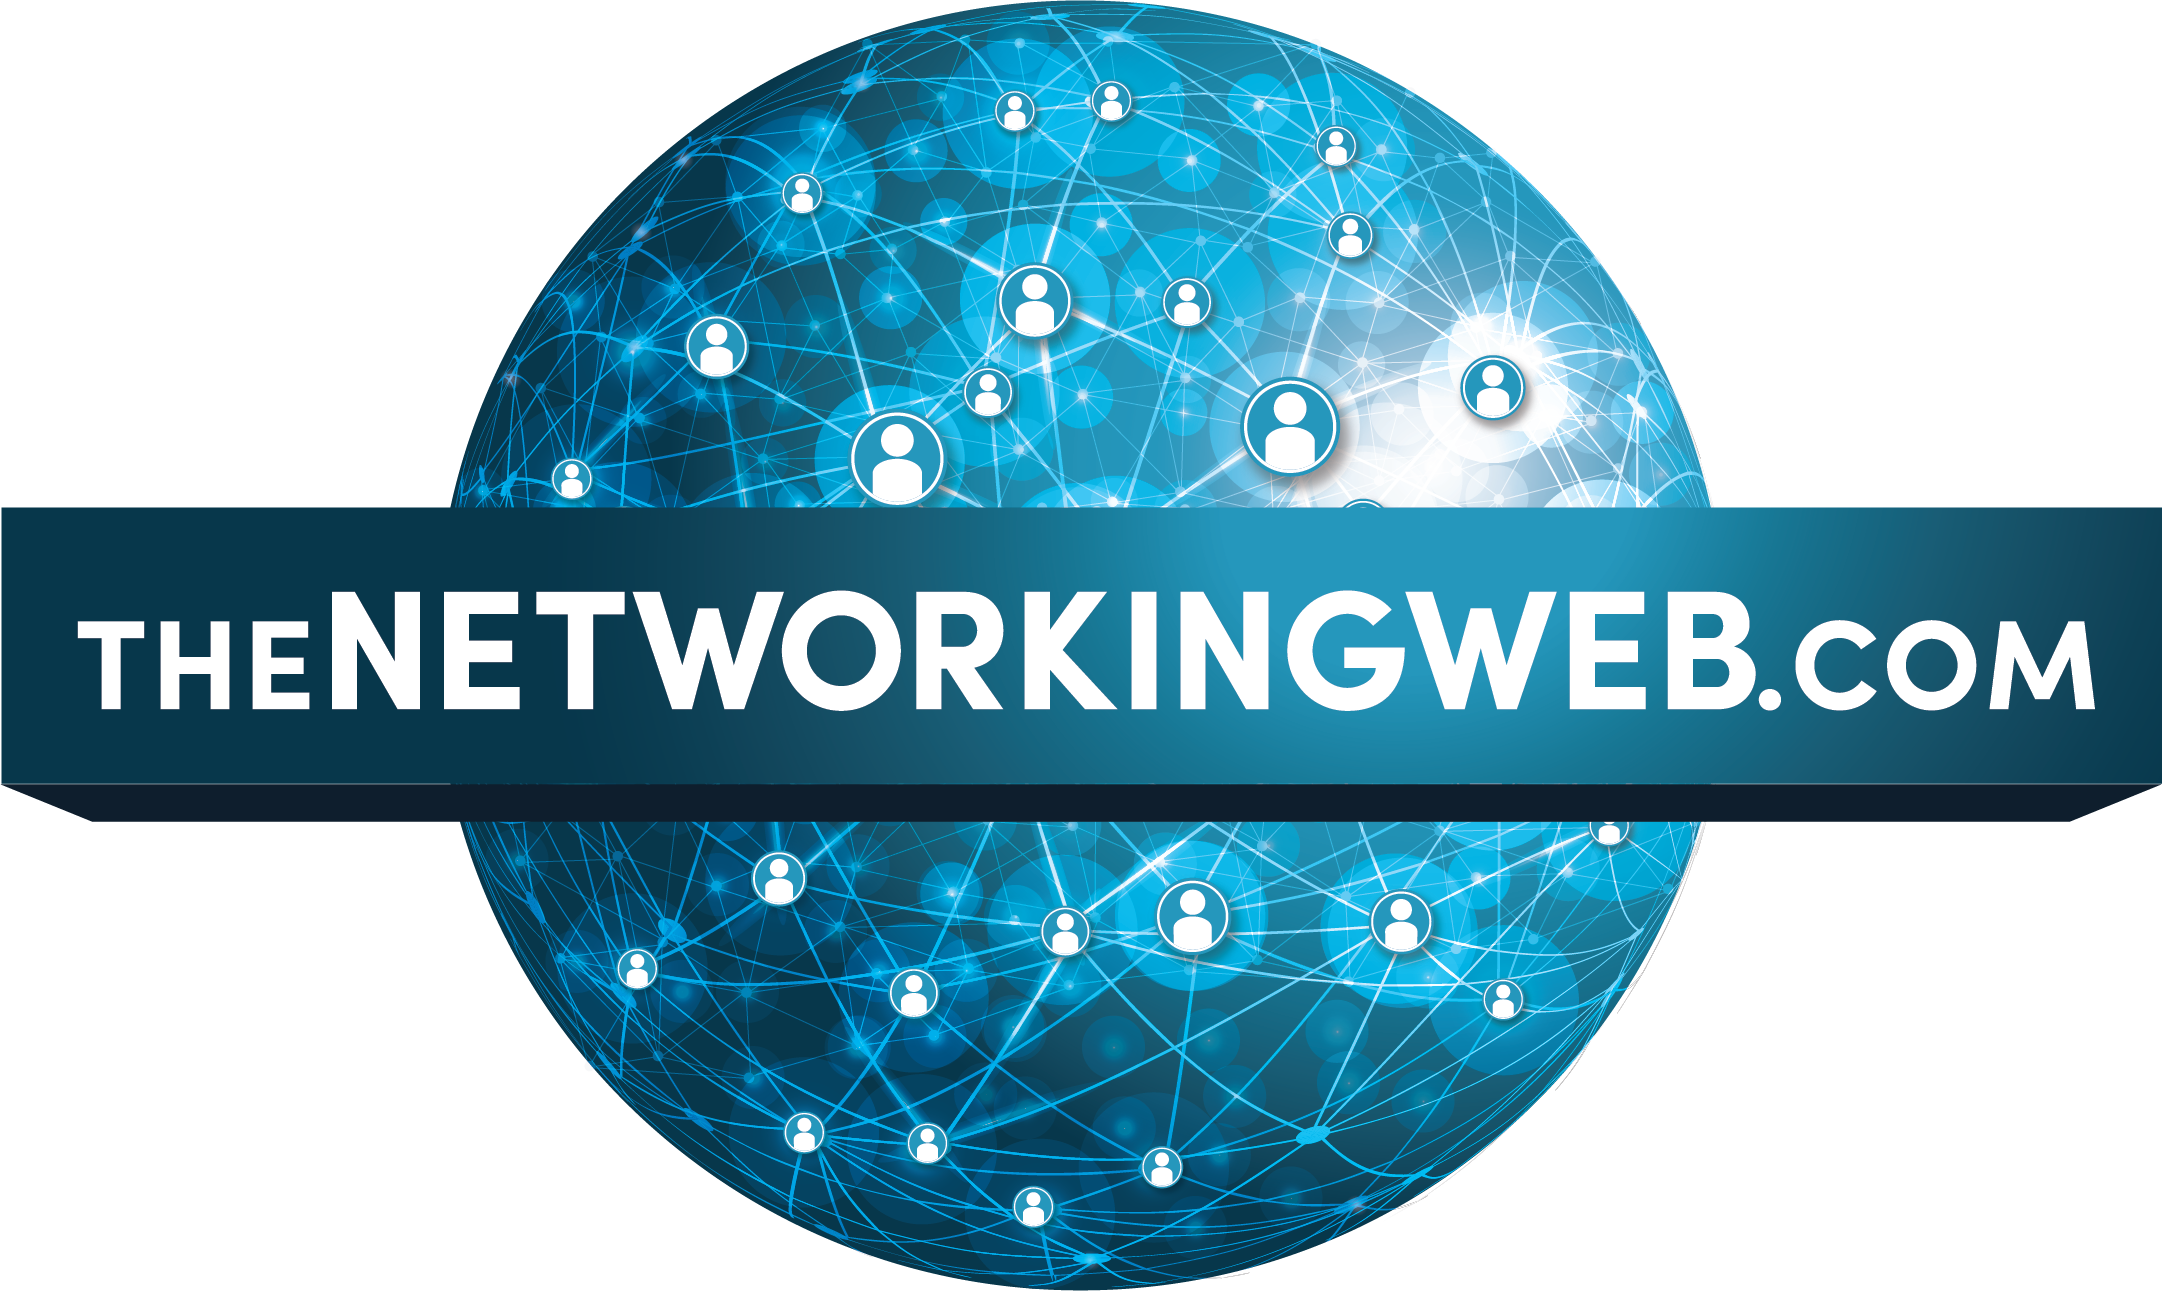 Logo for The Networking Web with user icons connected on a digital globe